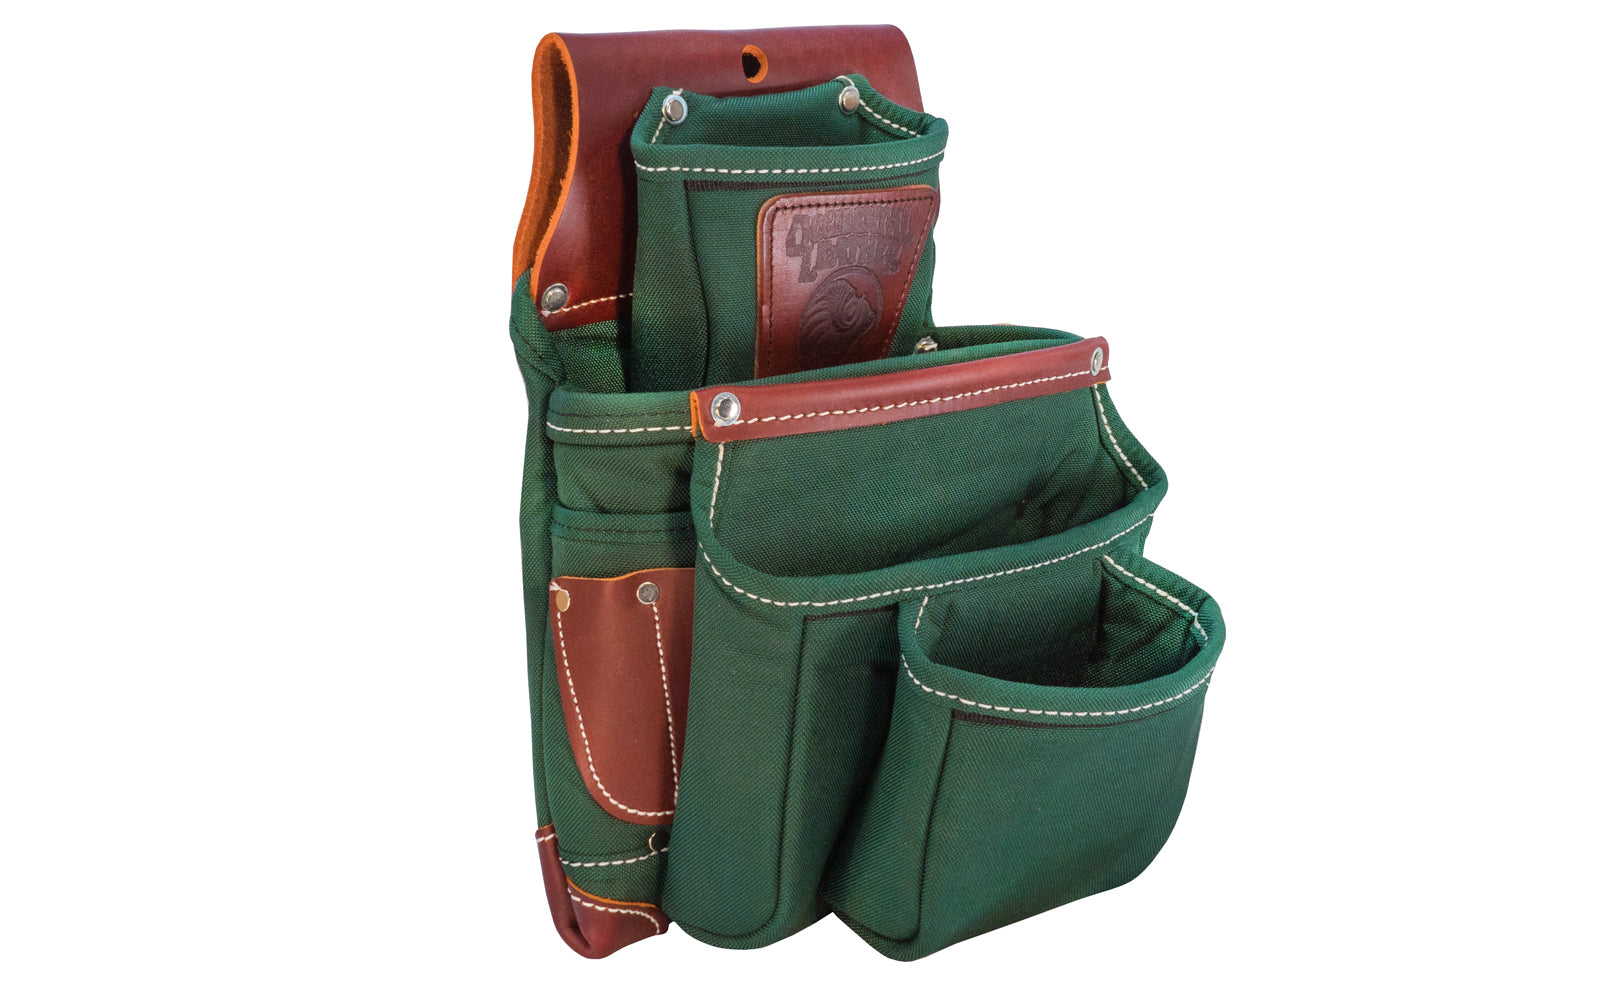 Occidental Leather "Oxy Lights" 4-Pouch Tool Bag ~ 8062 - Fits 3" work belt - Green Pouch - 4-pouch tool bag features holders for pencils, work knife, chisel, level, lumber crayon, hammer loop. Tool bag corners are reinforced with Occidental's "OxyRed" leather. Nylon & genuine Leather - Green Color - 759244088502